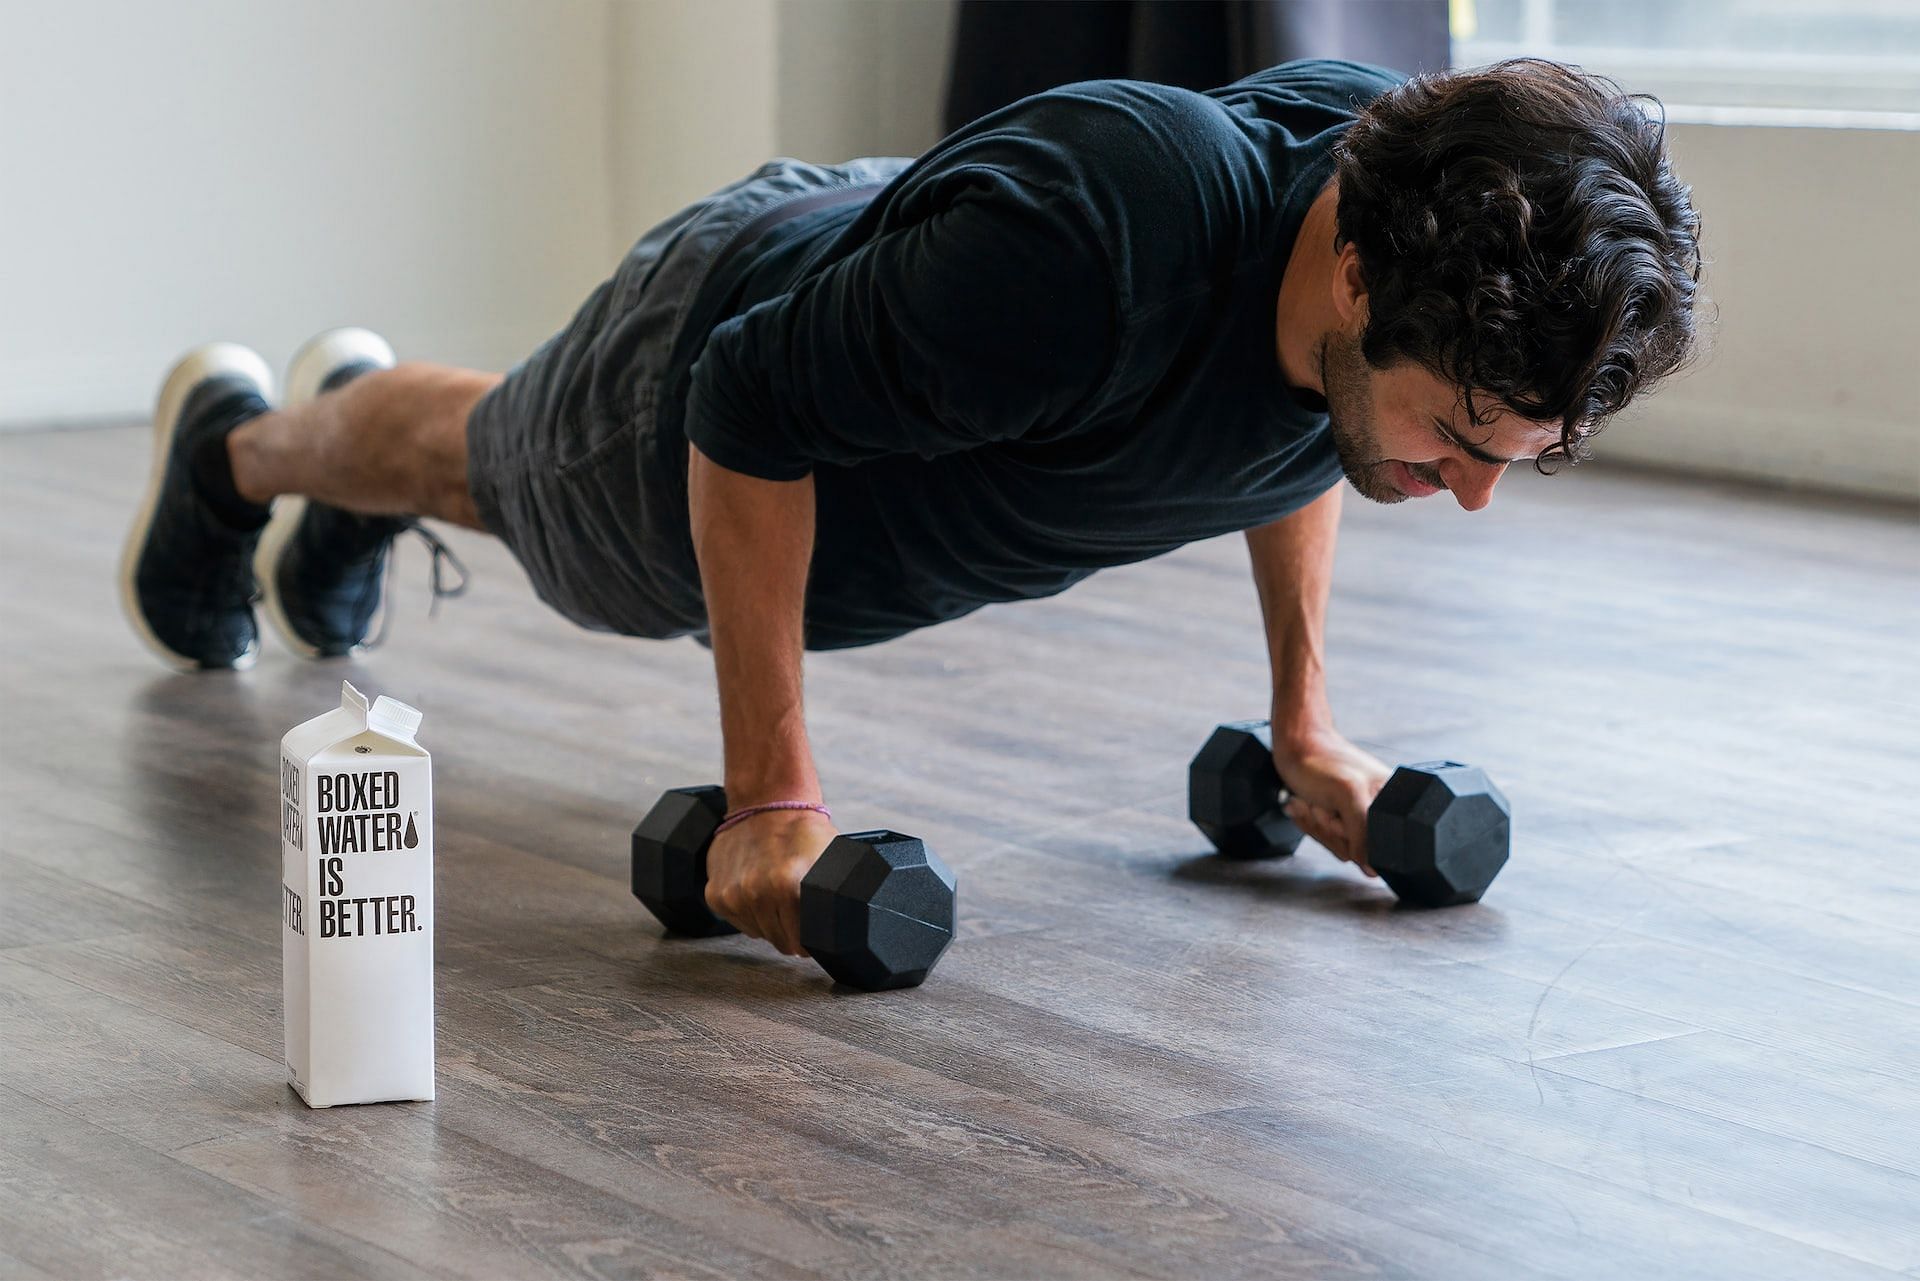 Guide to best full-body exercises for strength and endurance. (Photo via Boxed Water Is Better/Unsplash)